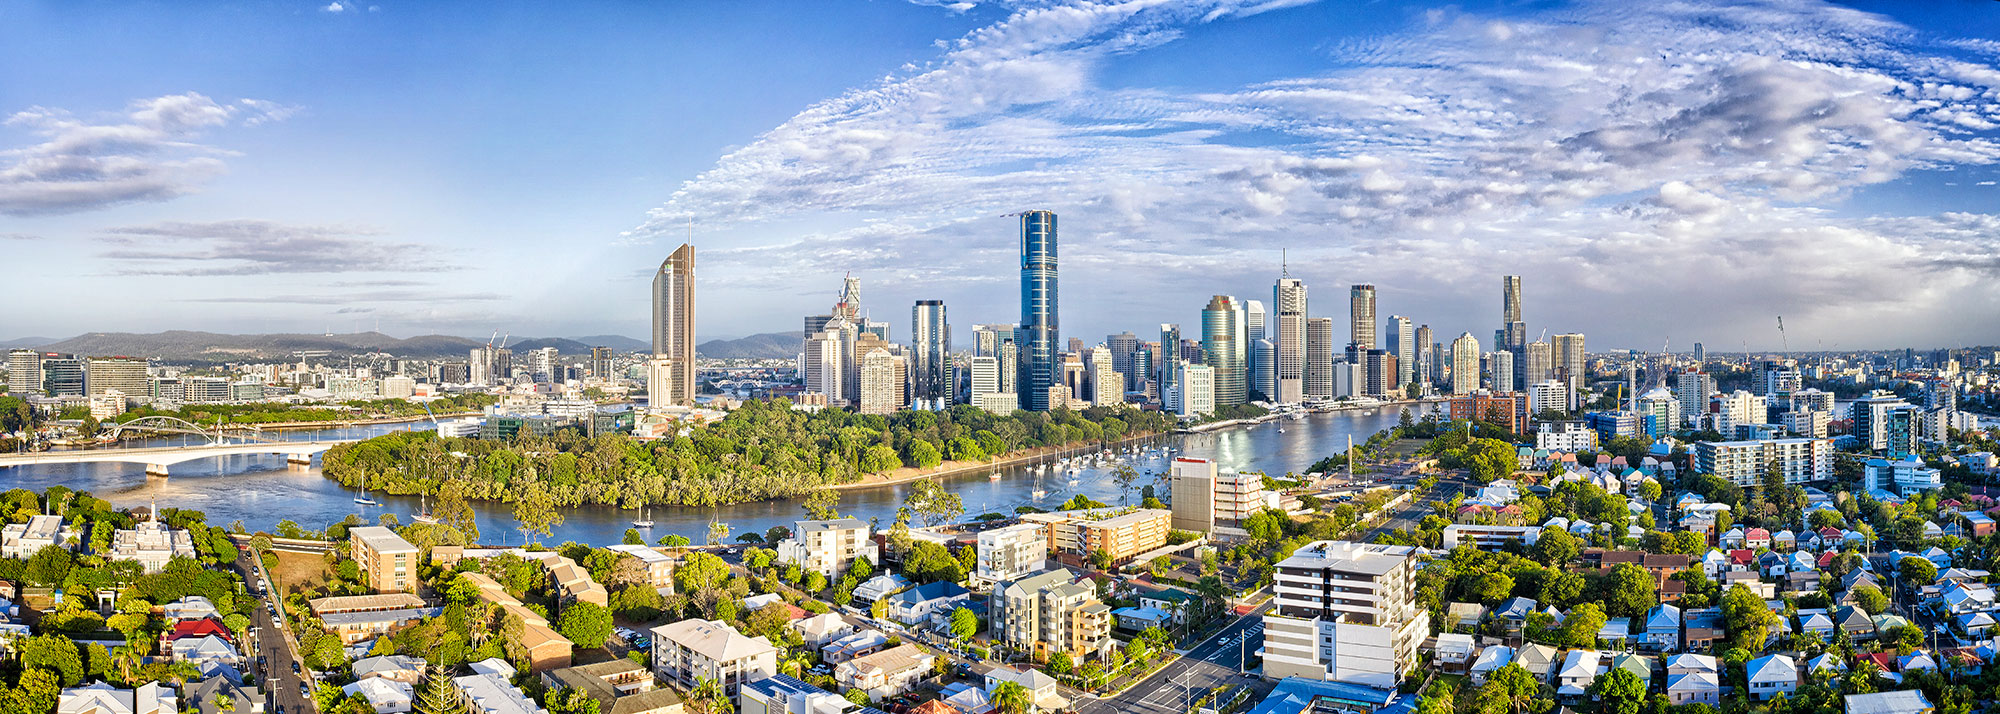 Drone photography Brisbane suburb of Kangaroo Point using panorama techniques